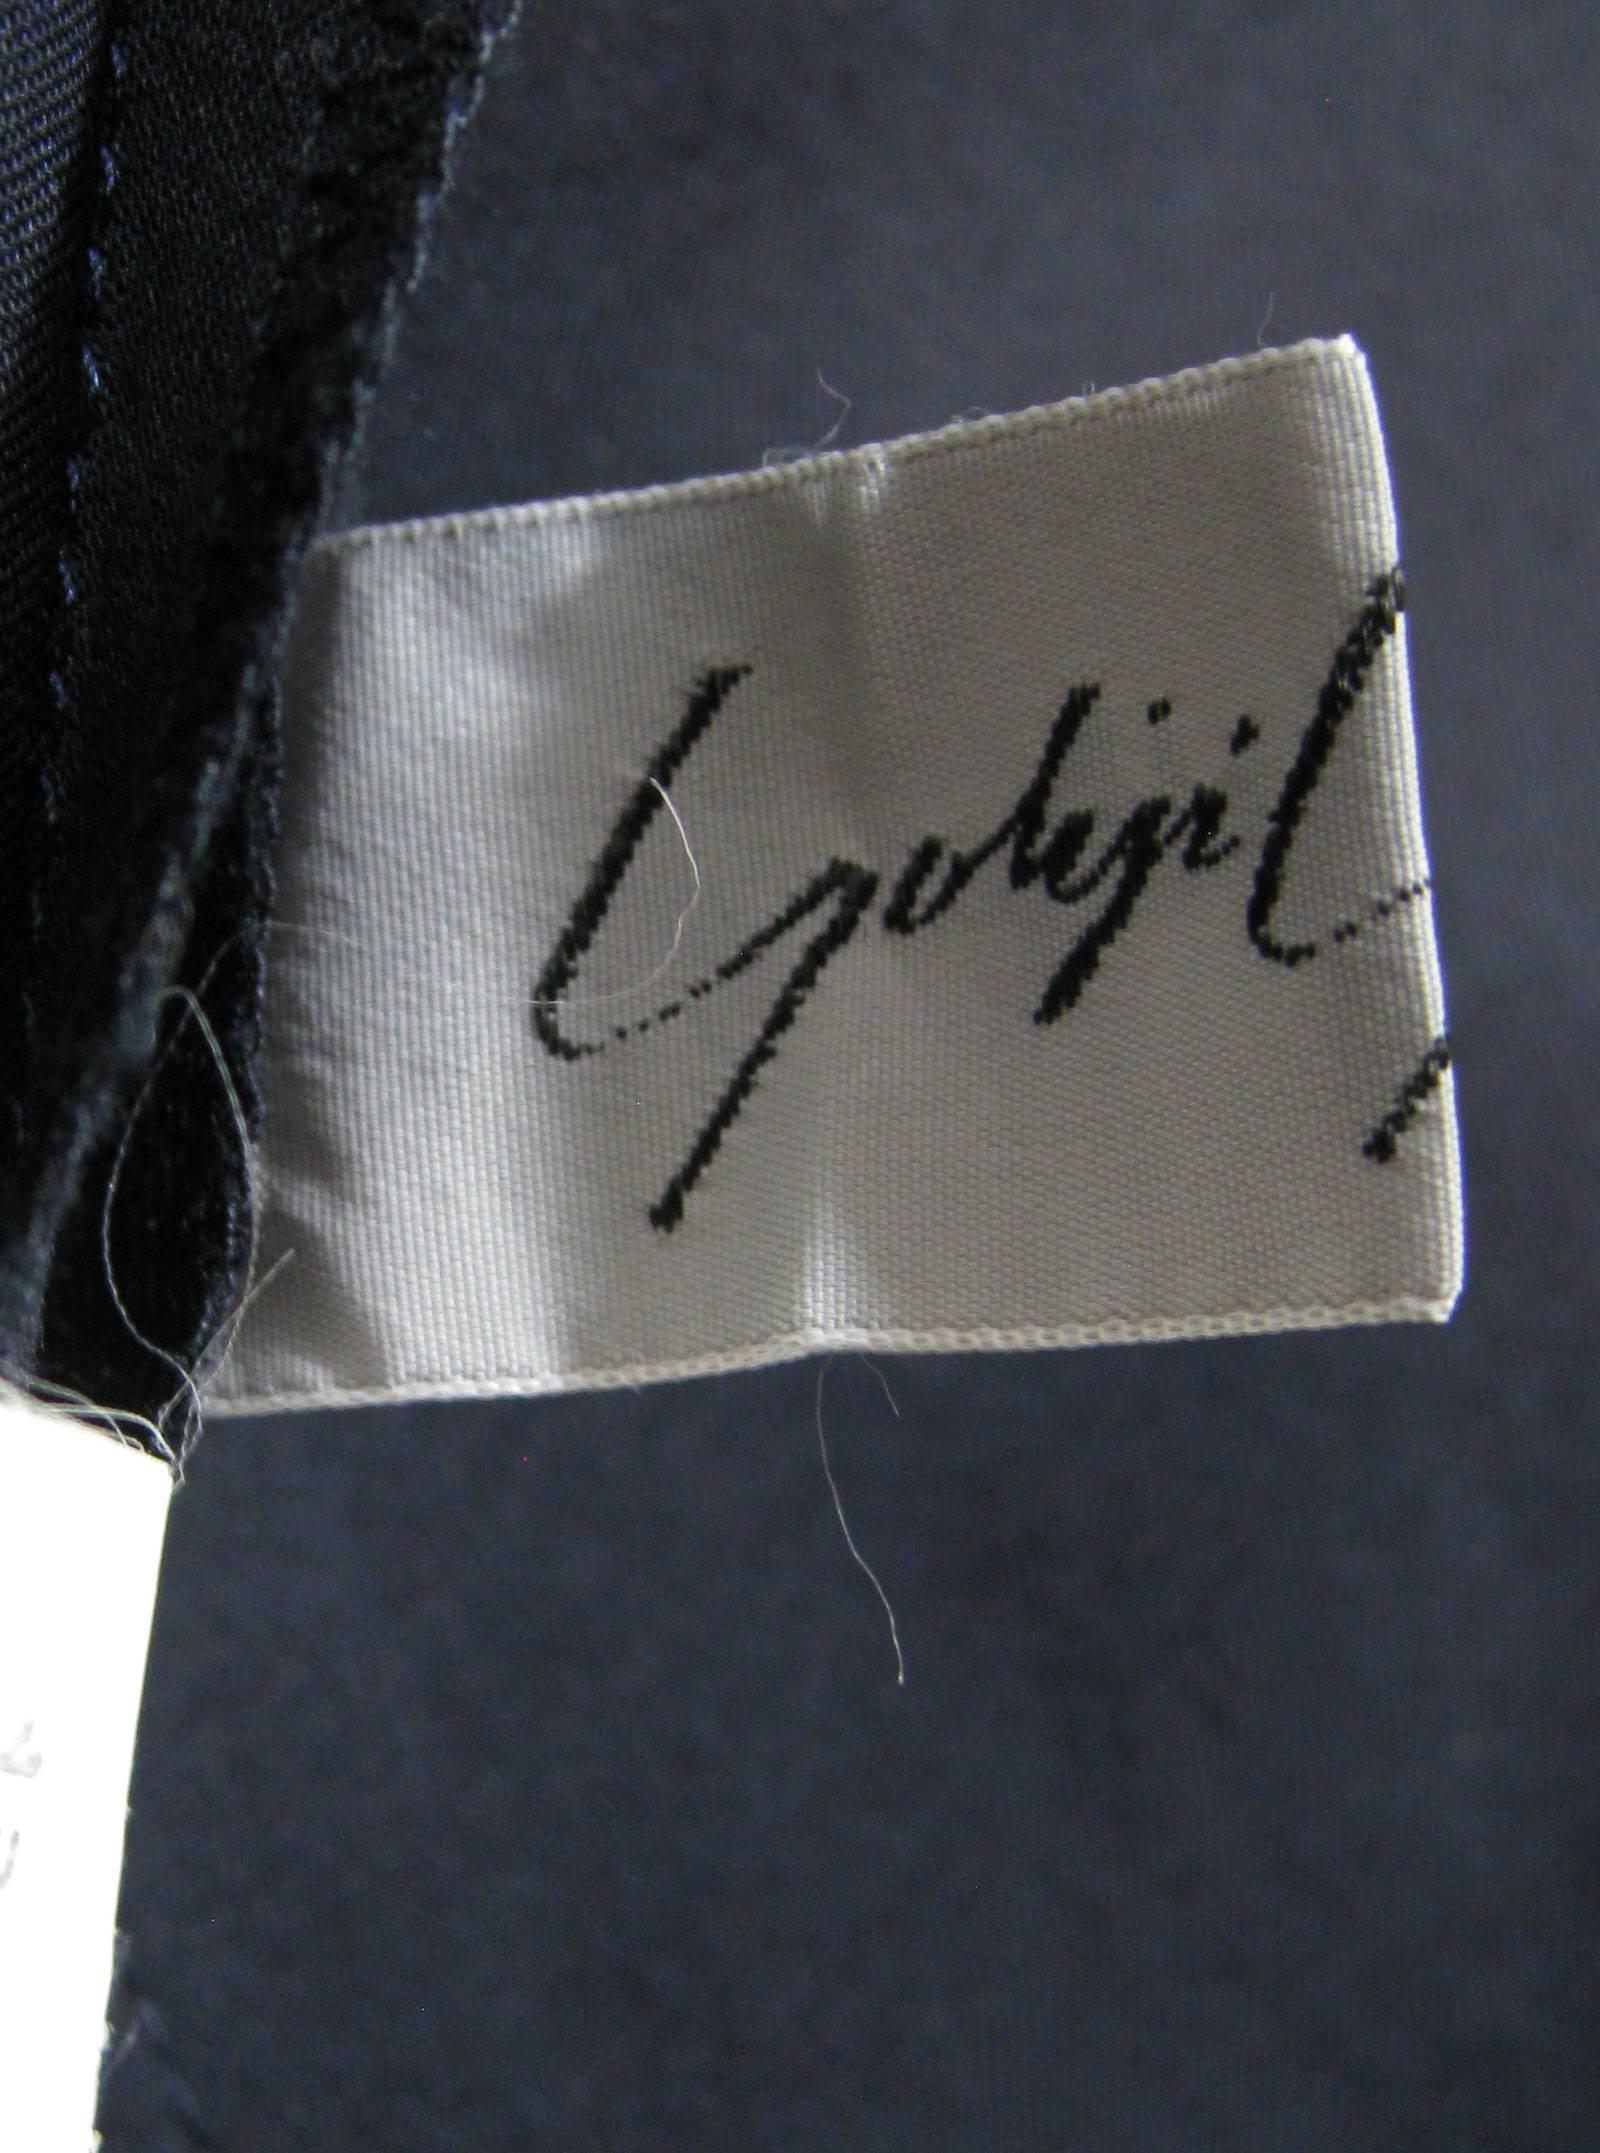 Yohji Yamamoto Navy Blue Shoulder Cut Out Dress In Excellent Condition For Sale In Oakland, CA